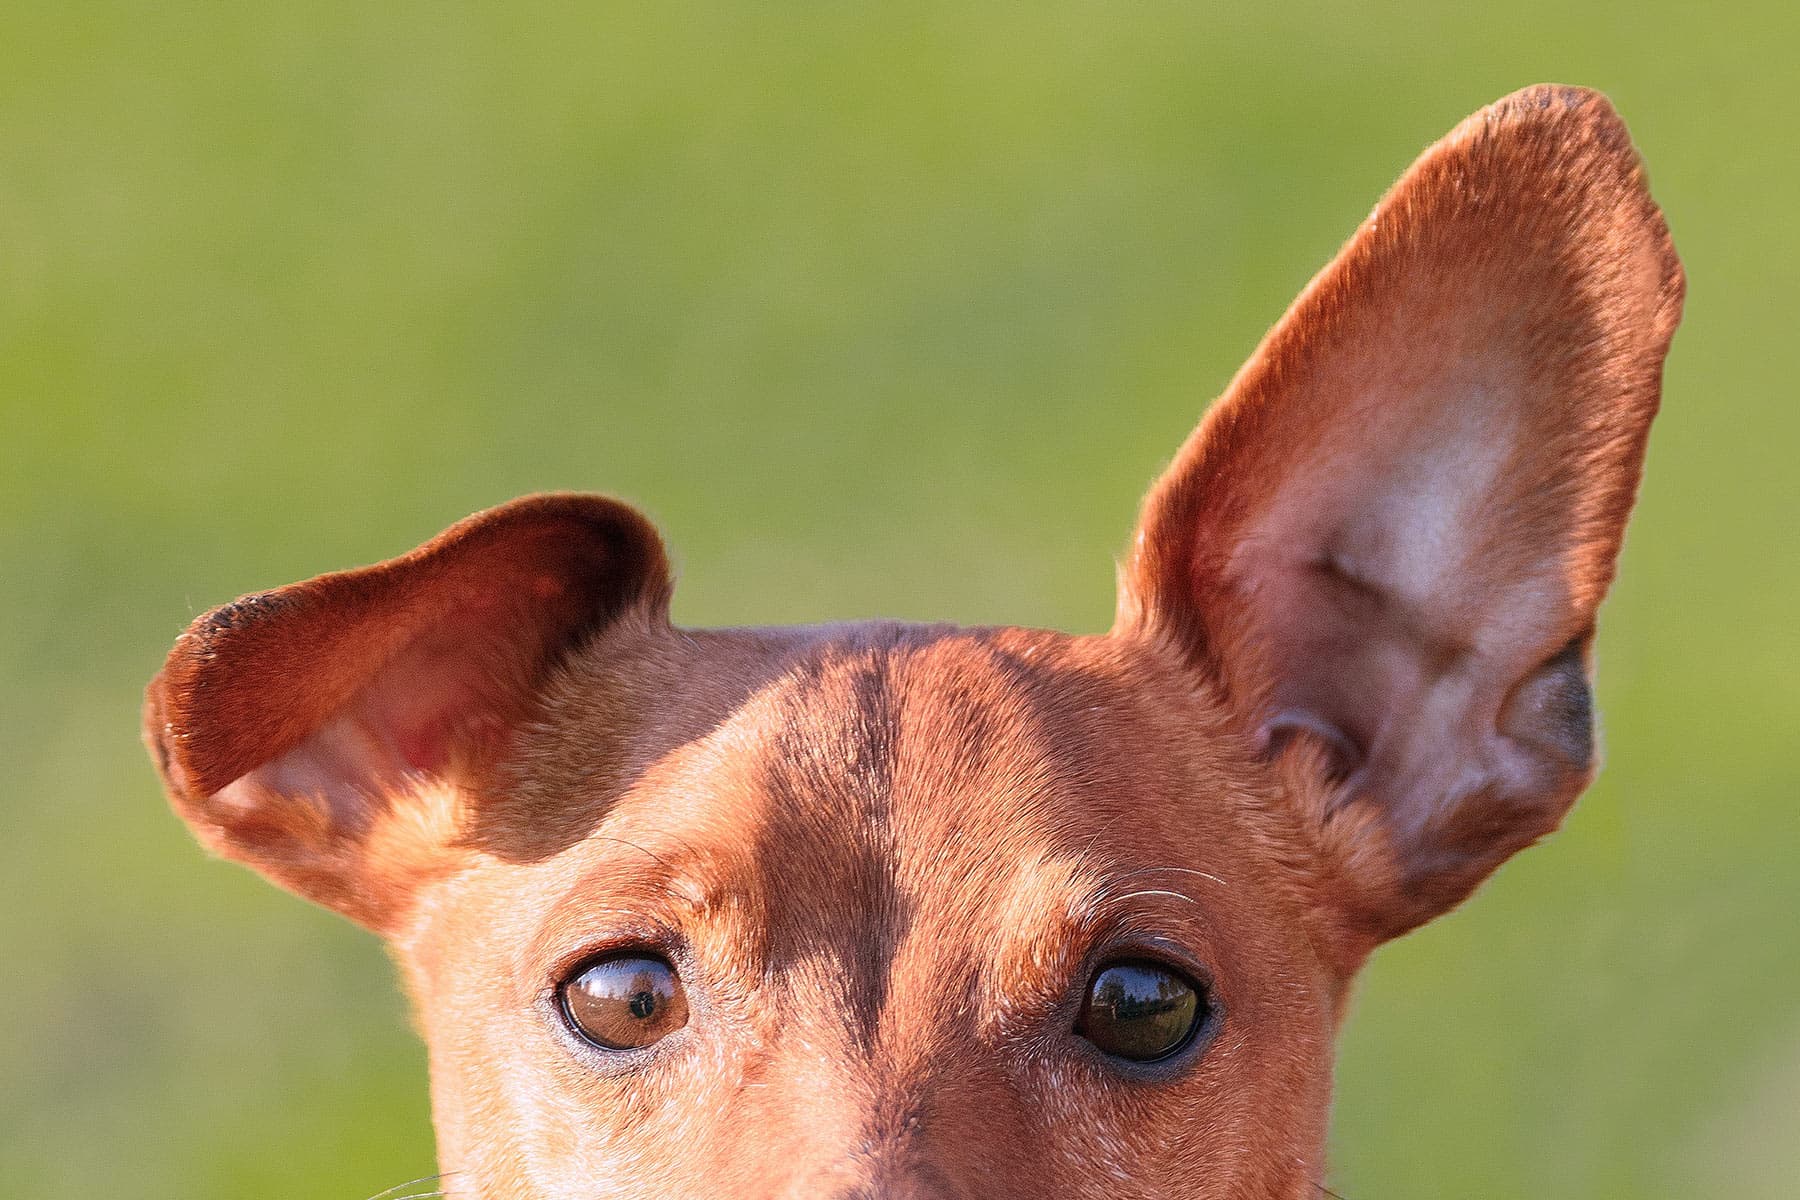 photo of dog with prominent ears